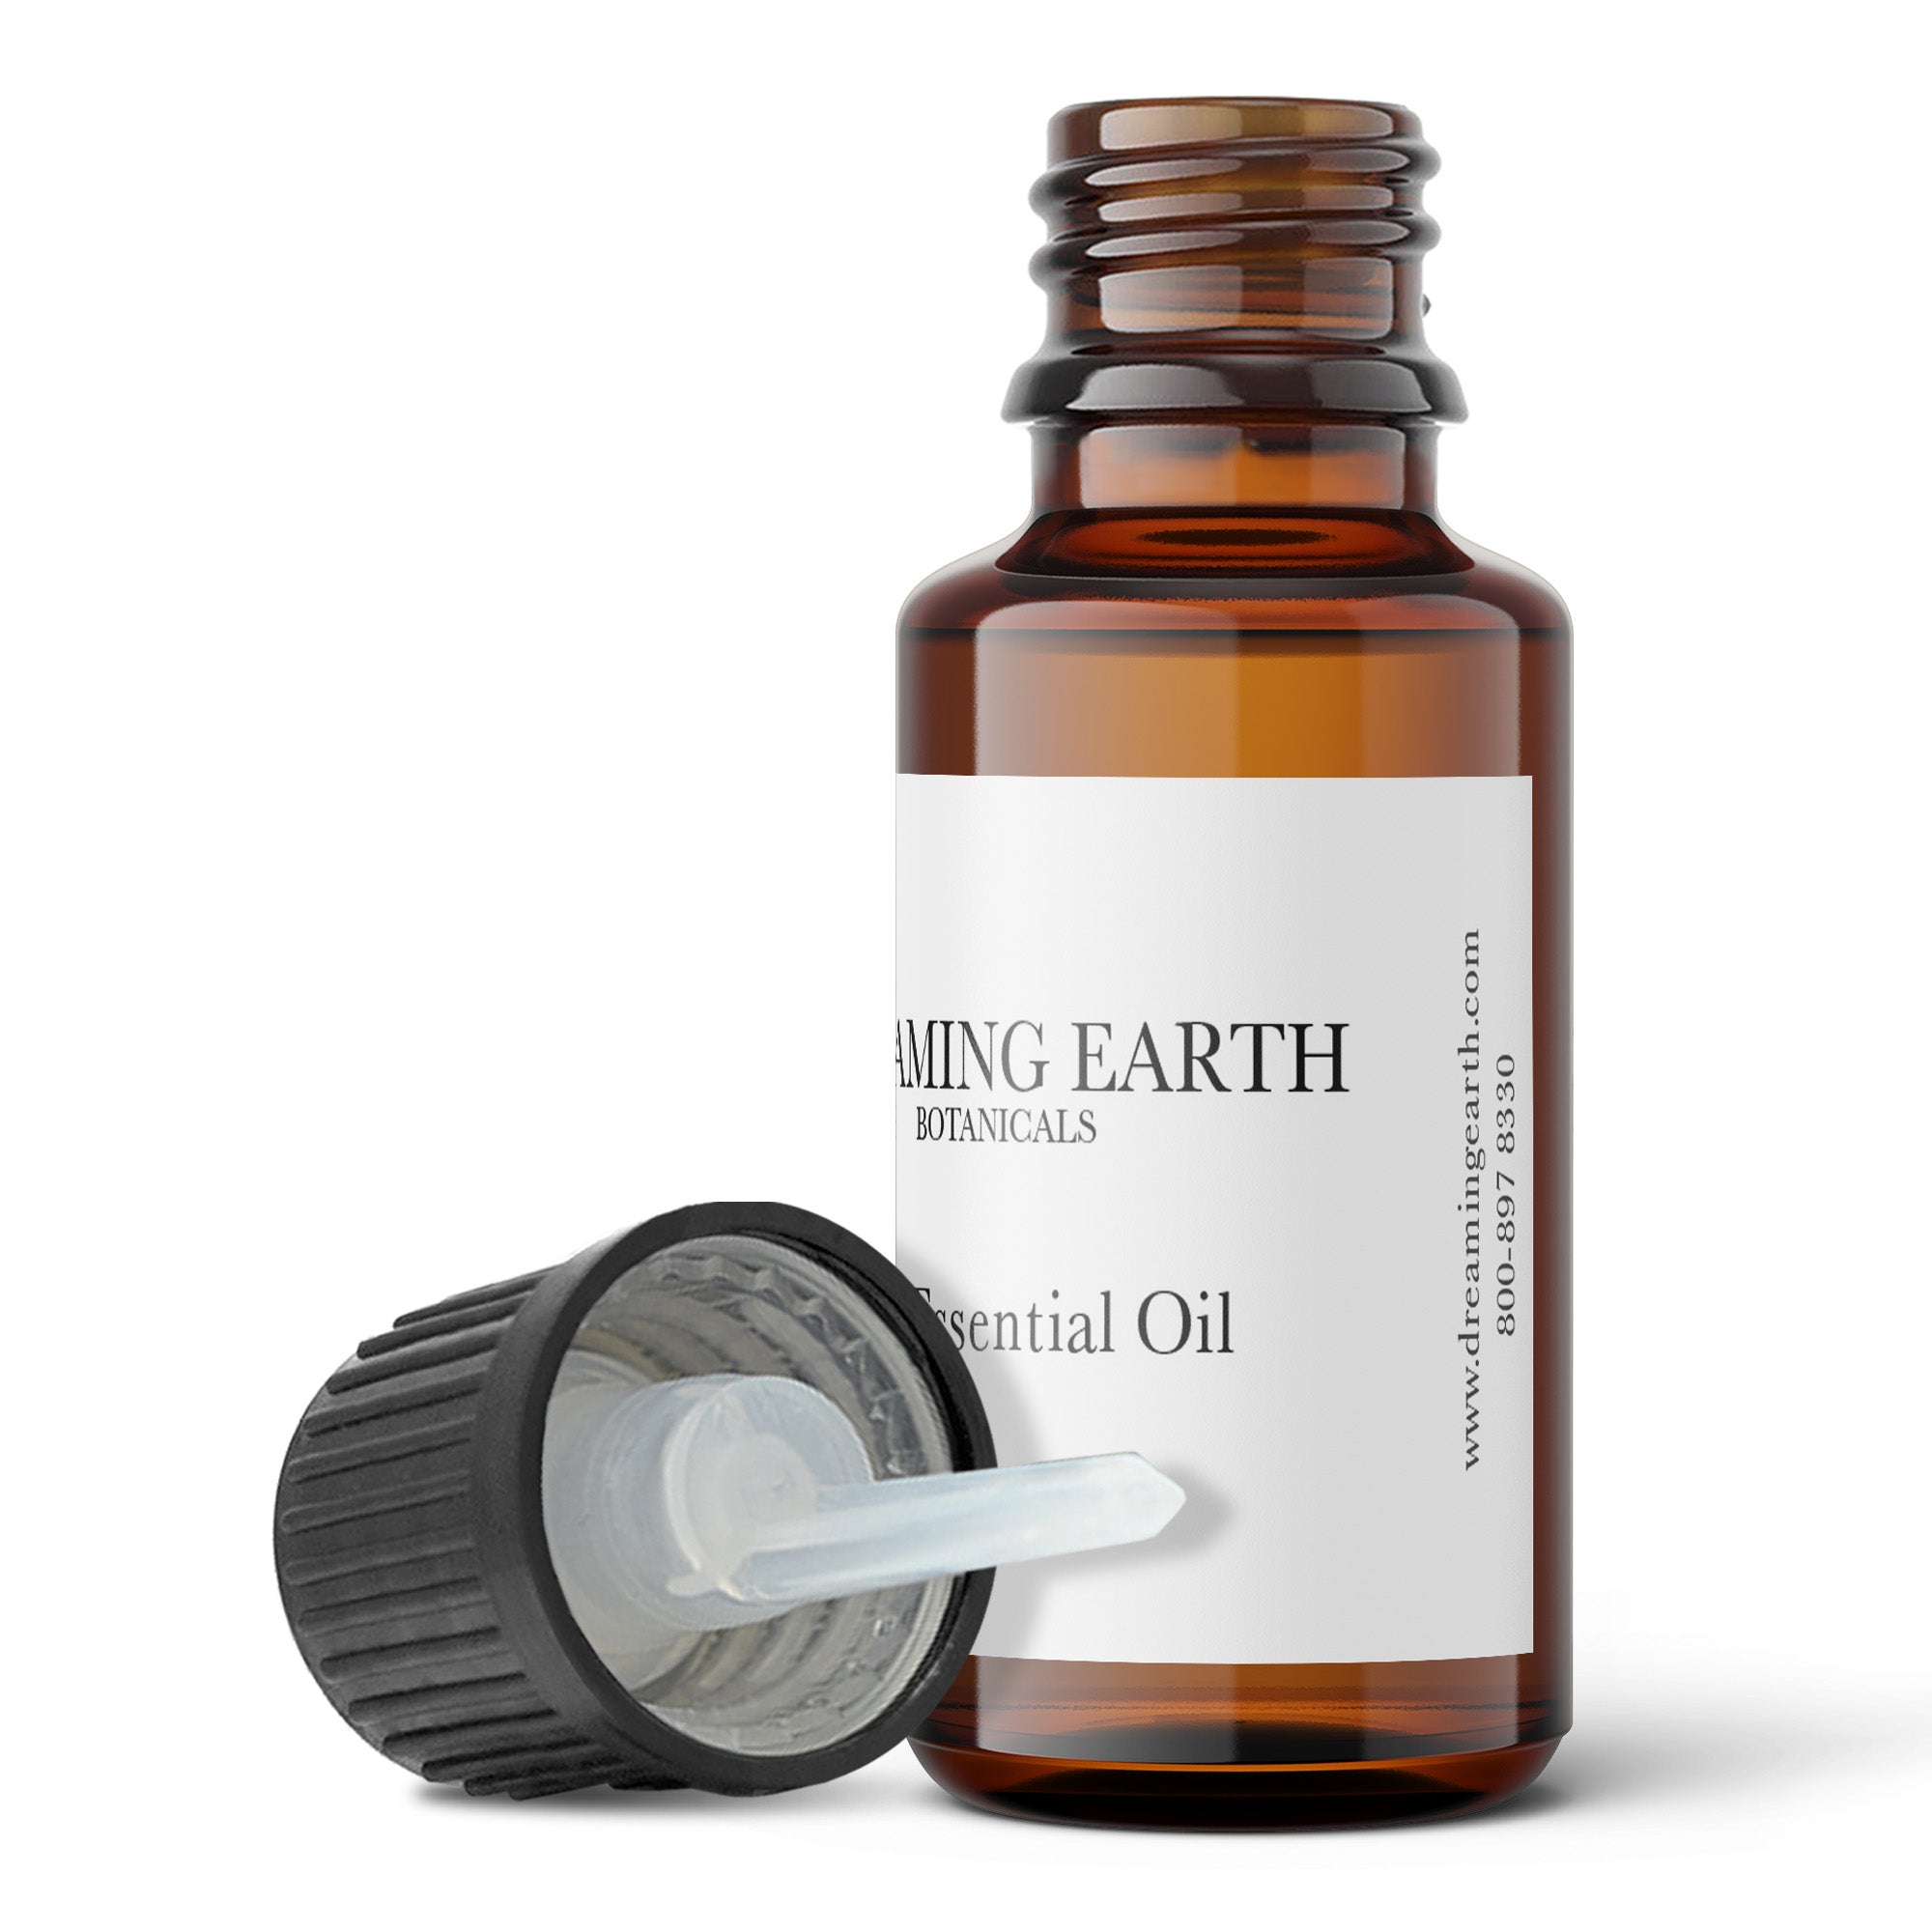 Load image into Gallery viewer, Mandarin Essential Oil (Red) - Dreaming Earth Inc
